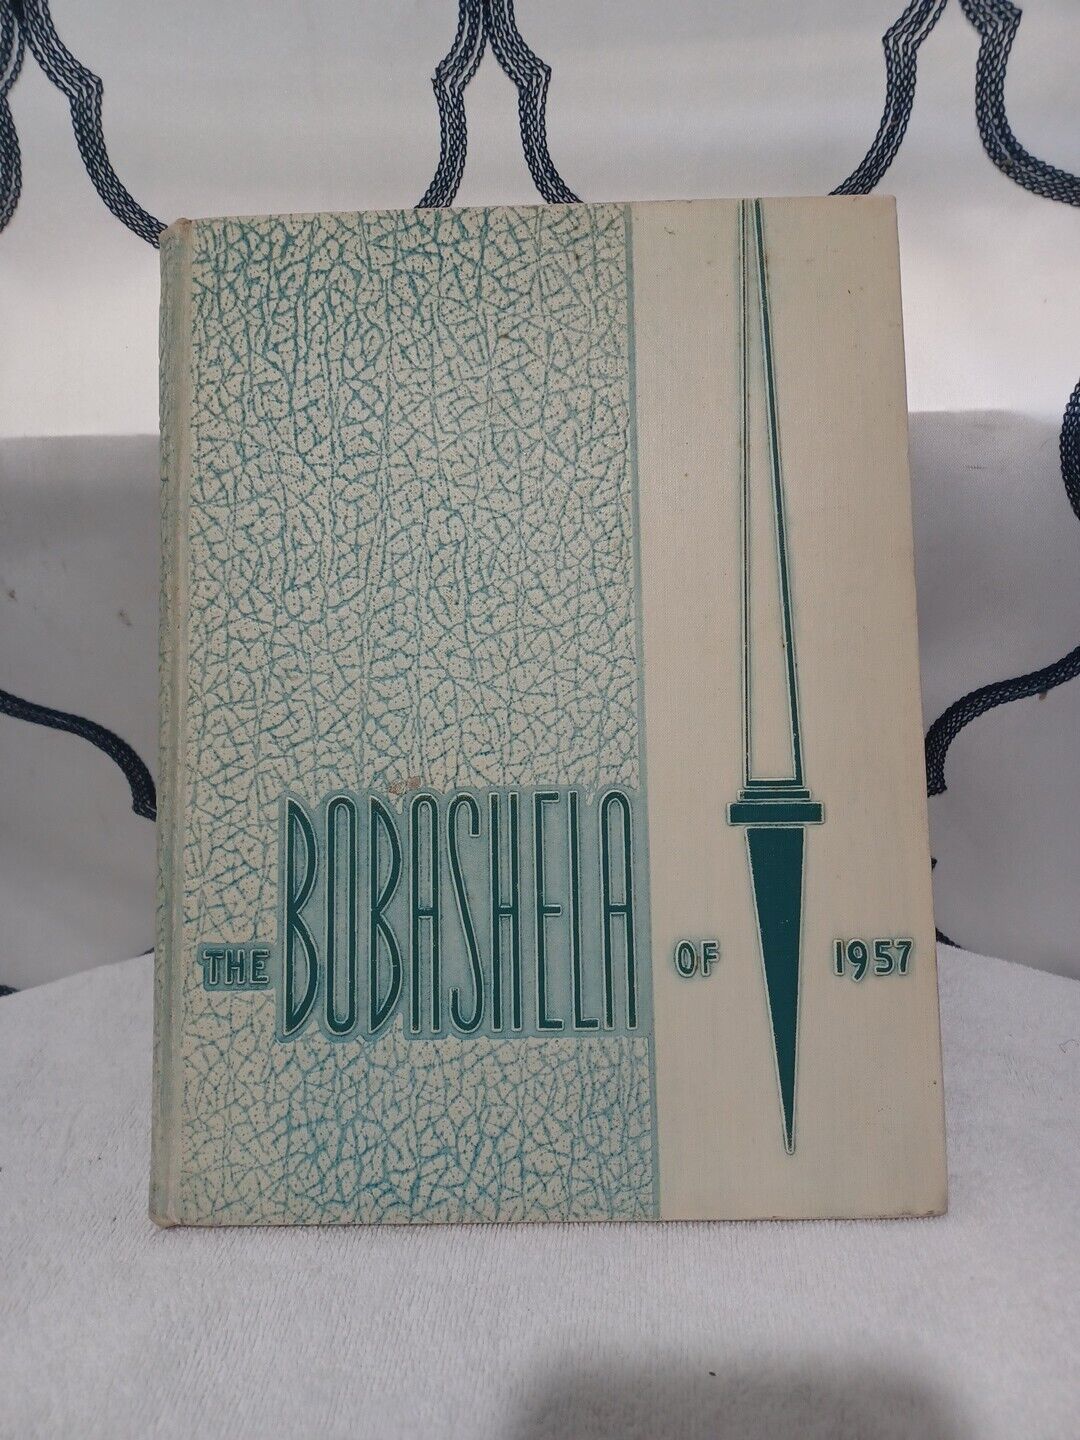 1957 Millsaps College Jackson Mississippi Bobashela Yearbook Great condition